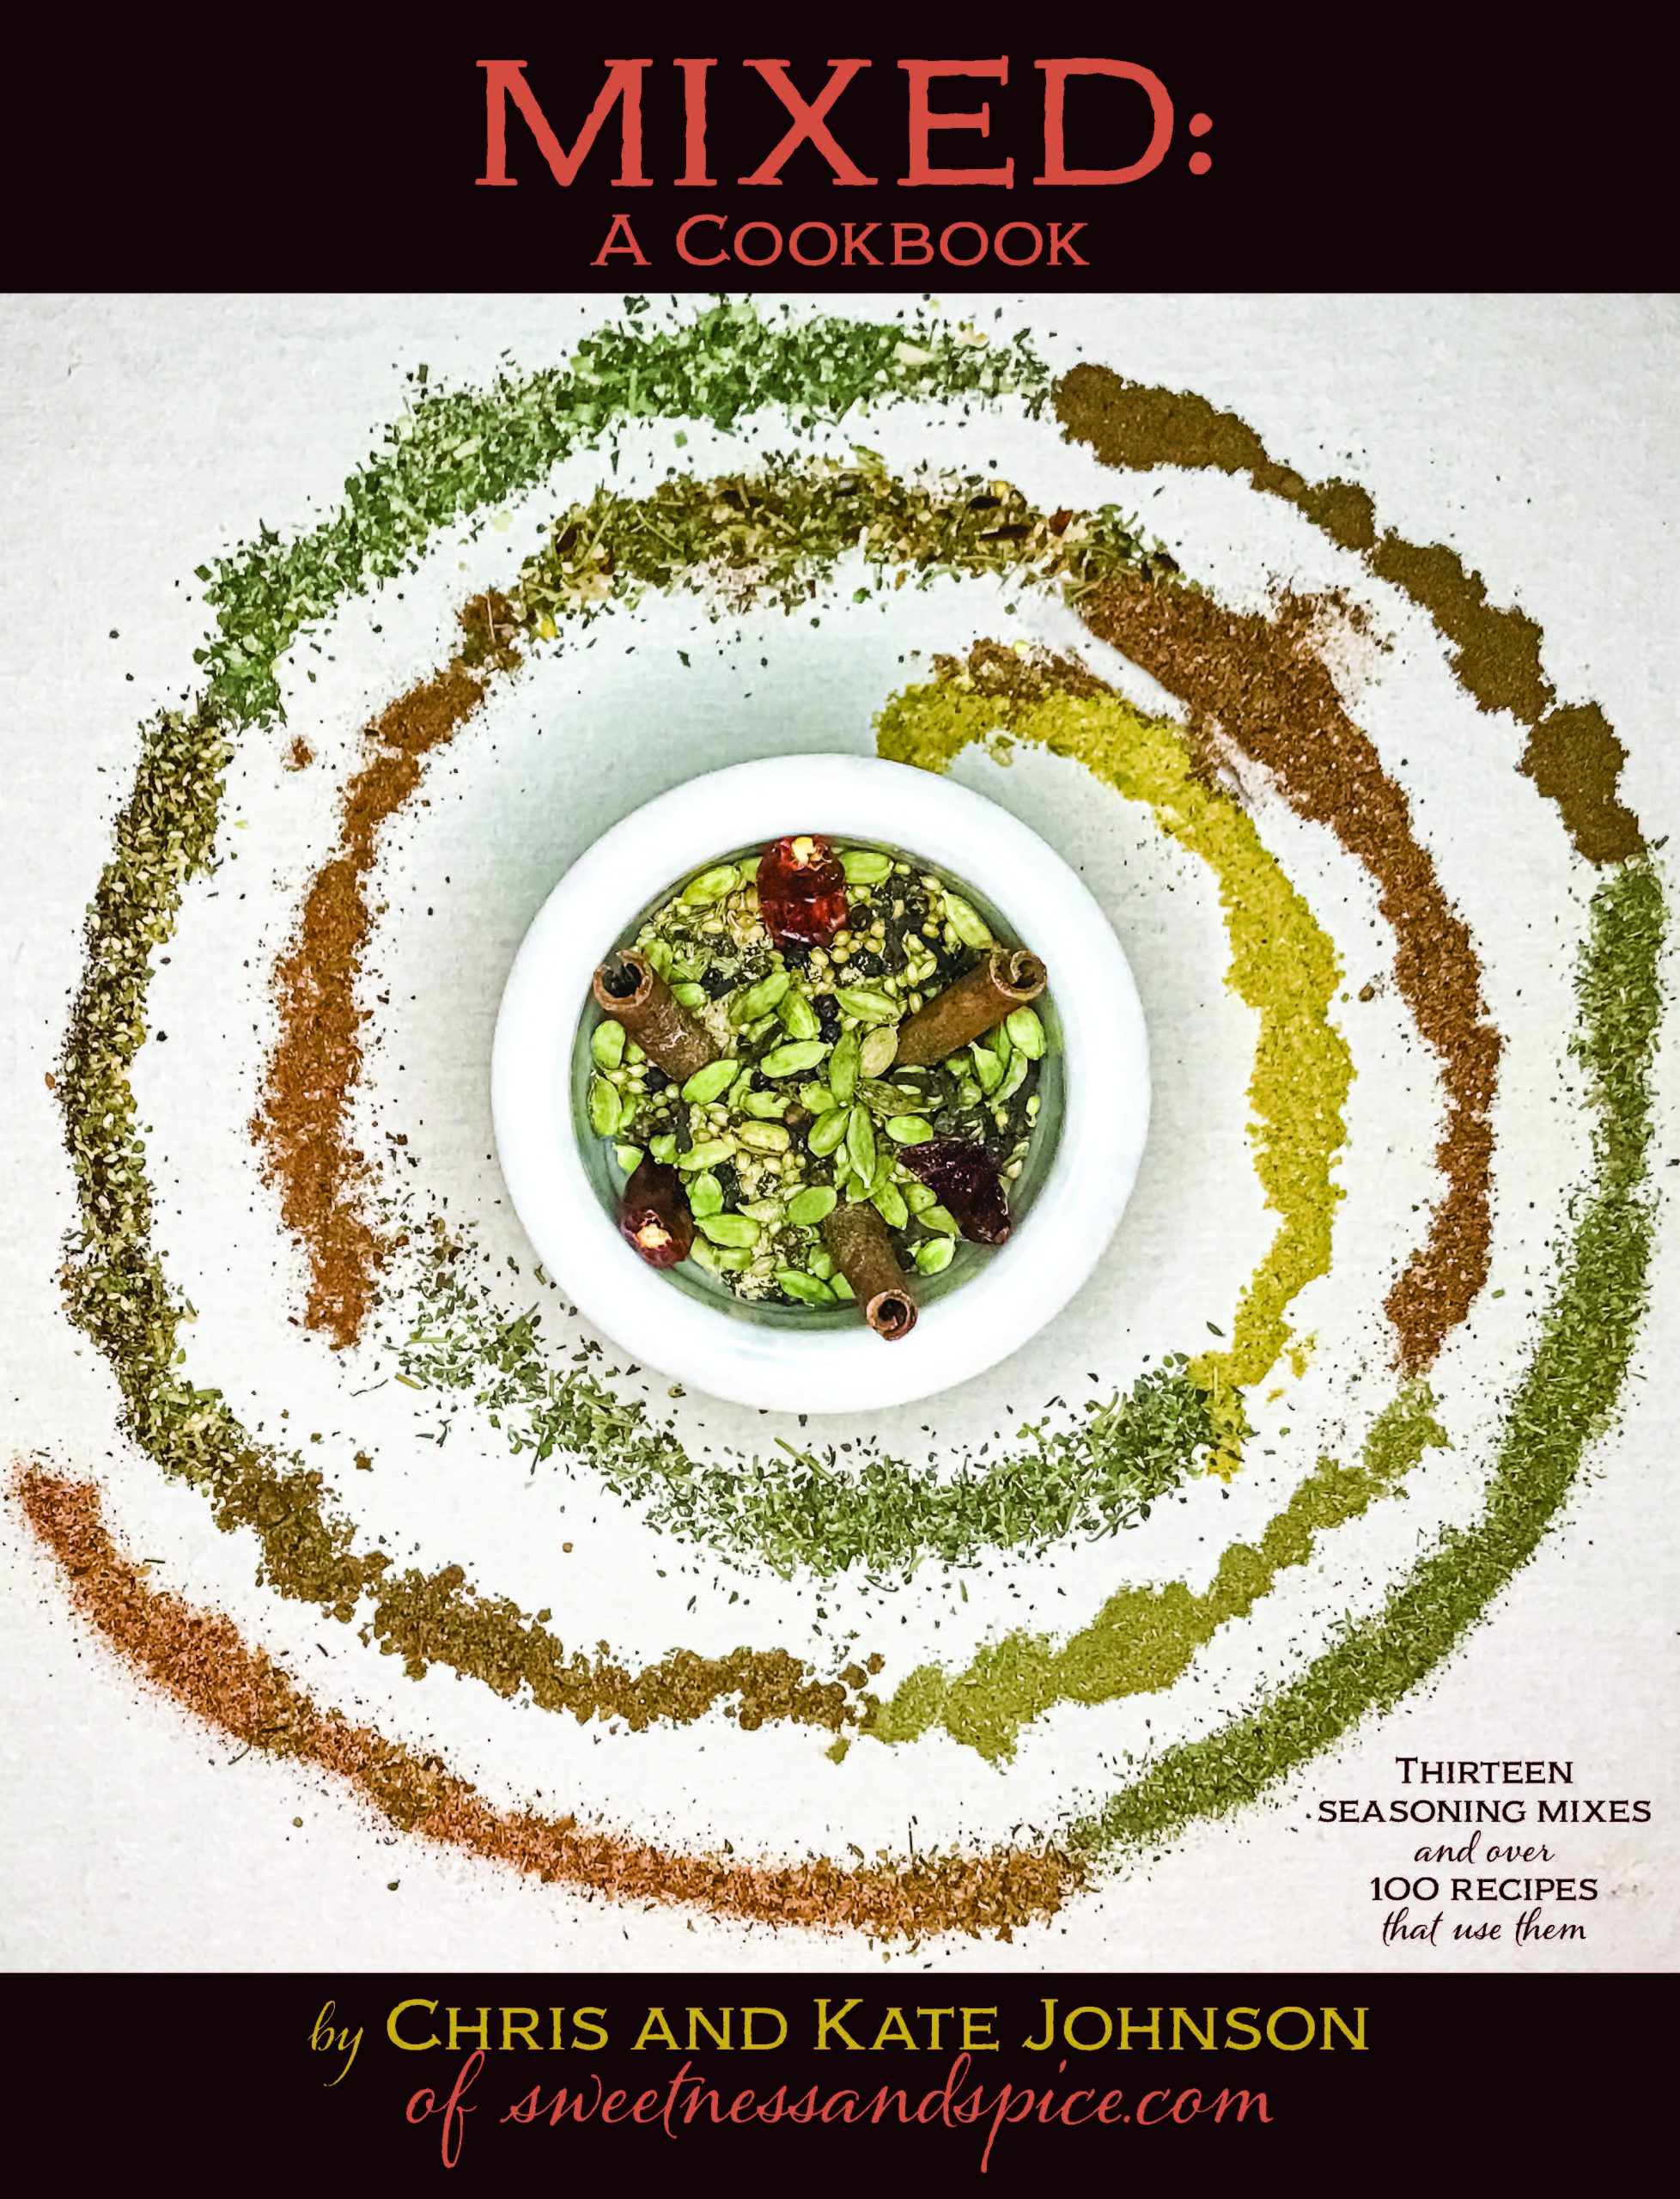 The cover design of the cookbook called "Mixed, Thirteen Seasoning Mixes and over 100 Recipes that use them." by Chris and Kate Johnson. On the cover is picture of a the thirteen mixes laid out as a spiral with whole spices in the middle.